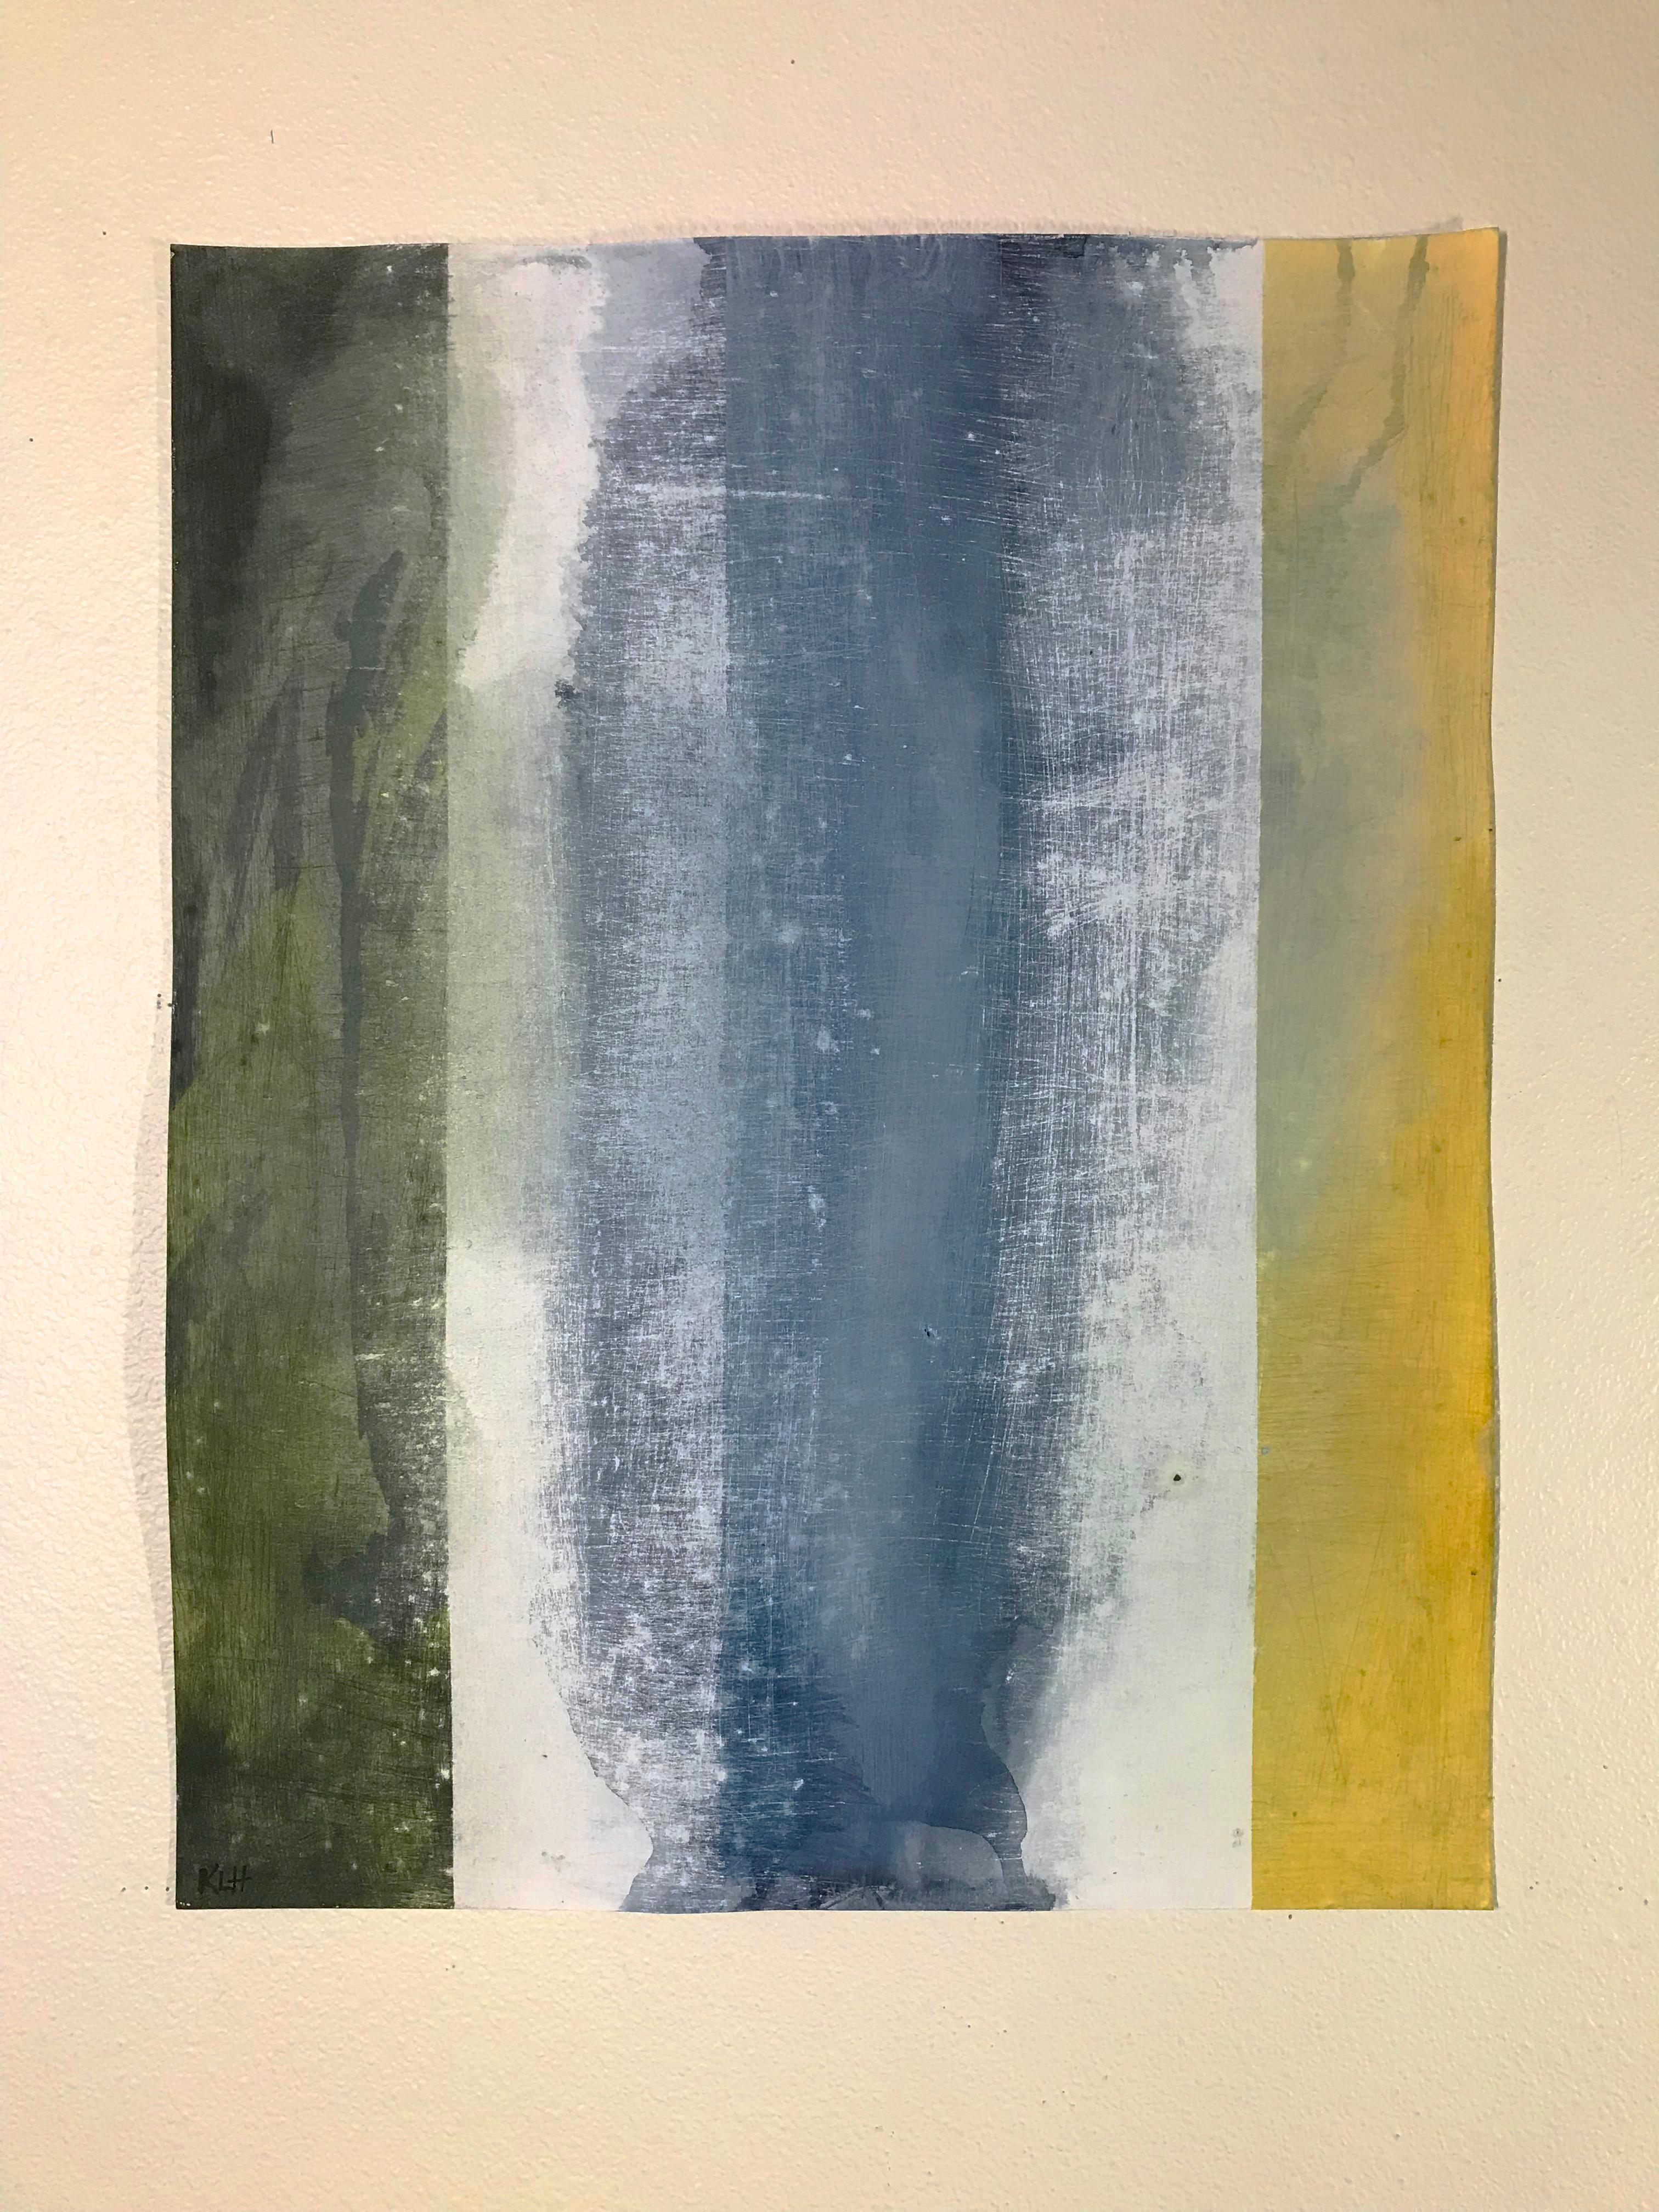 <p>Artist Comments<br>Vertical forms in beige, grey, olive, and yellow build this modern expressive abstract by artist Kris Haas. Marks and scratches circulate the grey column shedding subtle shadows around it. Part of Kris' derivative and ongoing